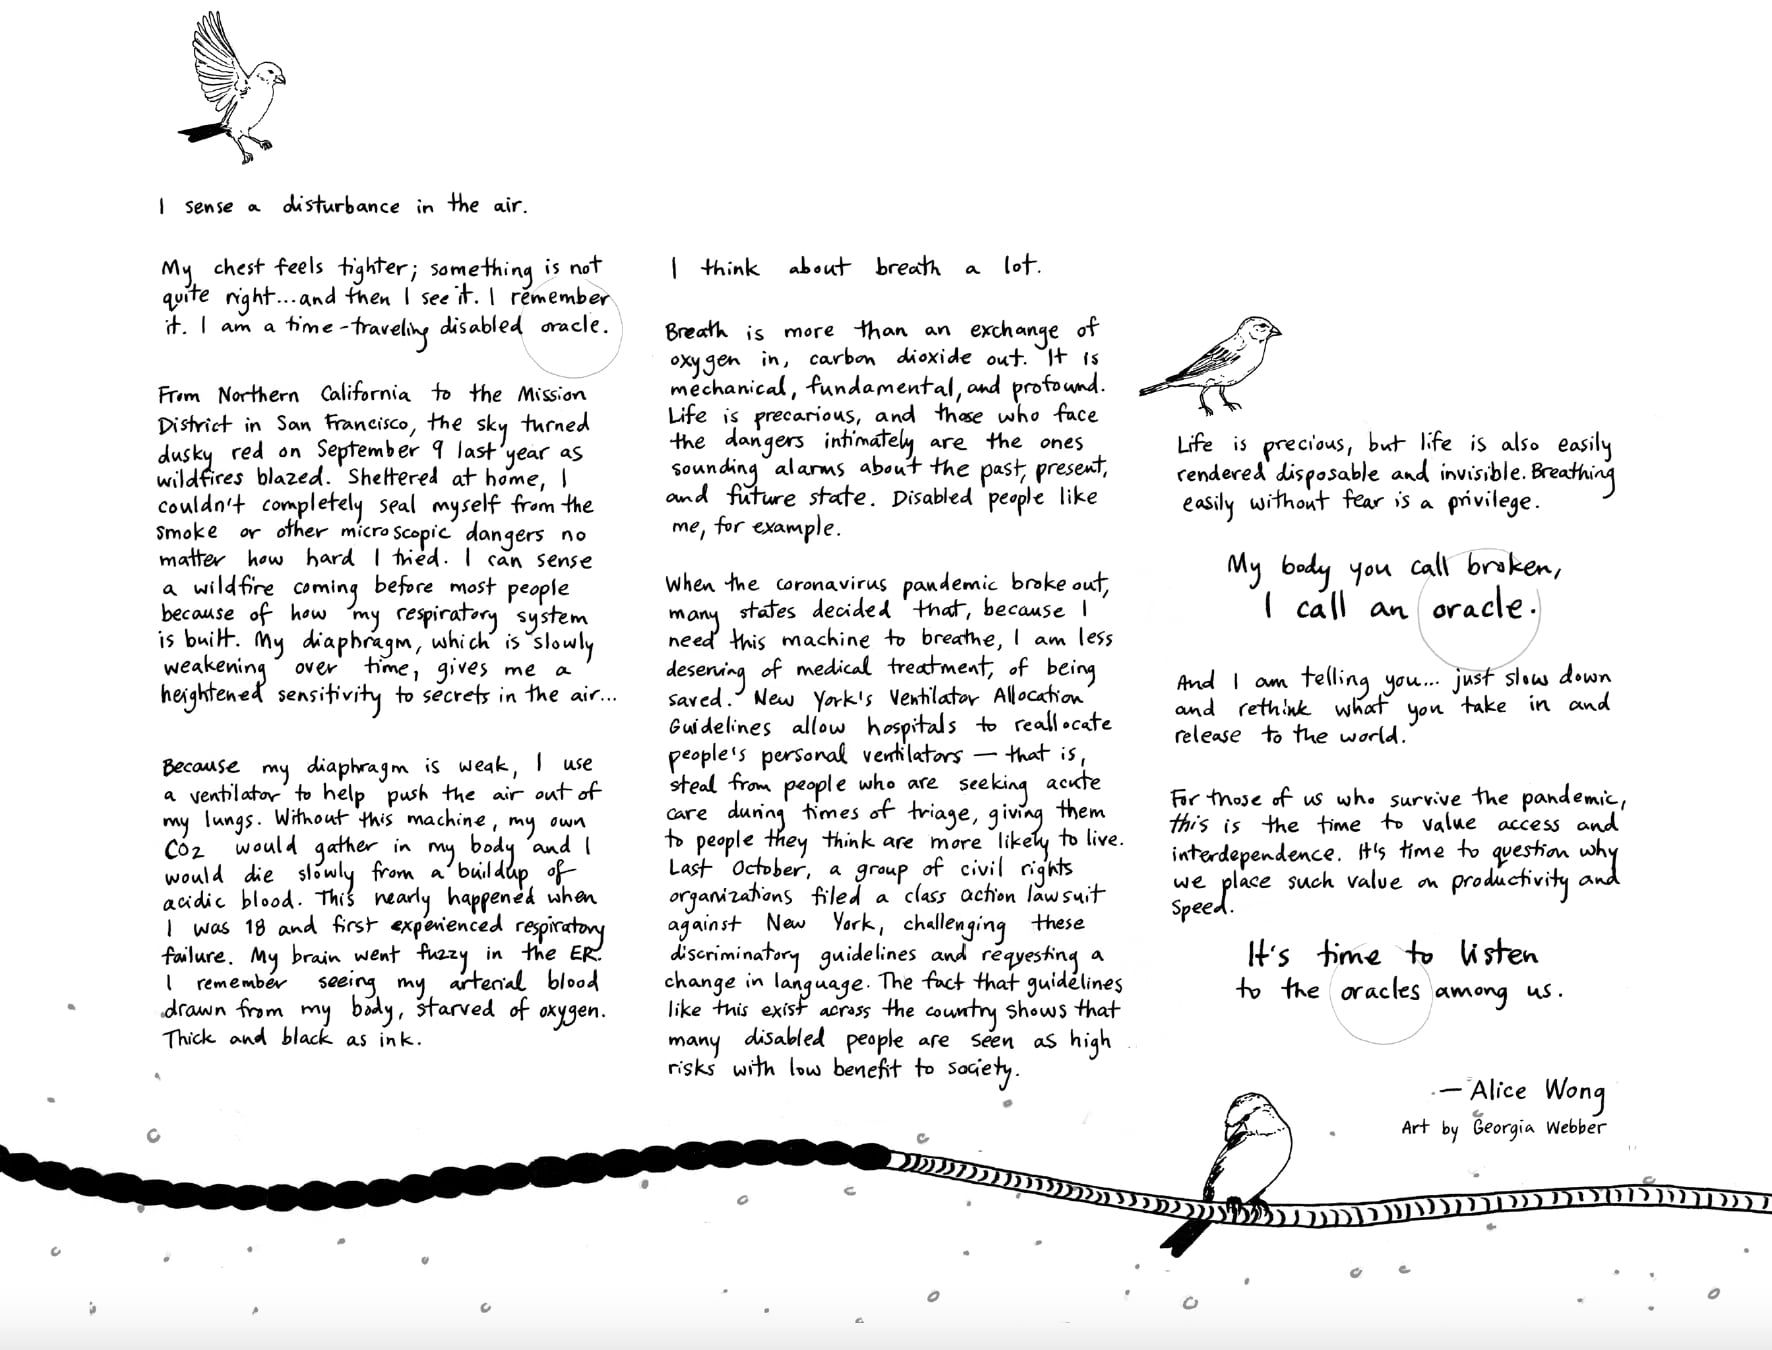 Screenshot of editorial handwritten by Georgia Webber with artwork and text in black. On the top and bottom there are small gray and black smudgy dots like smoke particulates. At the bottom in a curvy horizontal row is black and translucent tubing that is used for a ventilator with one canary perched on it. Two other canaries are interspersed within the text.